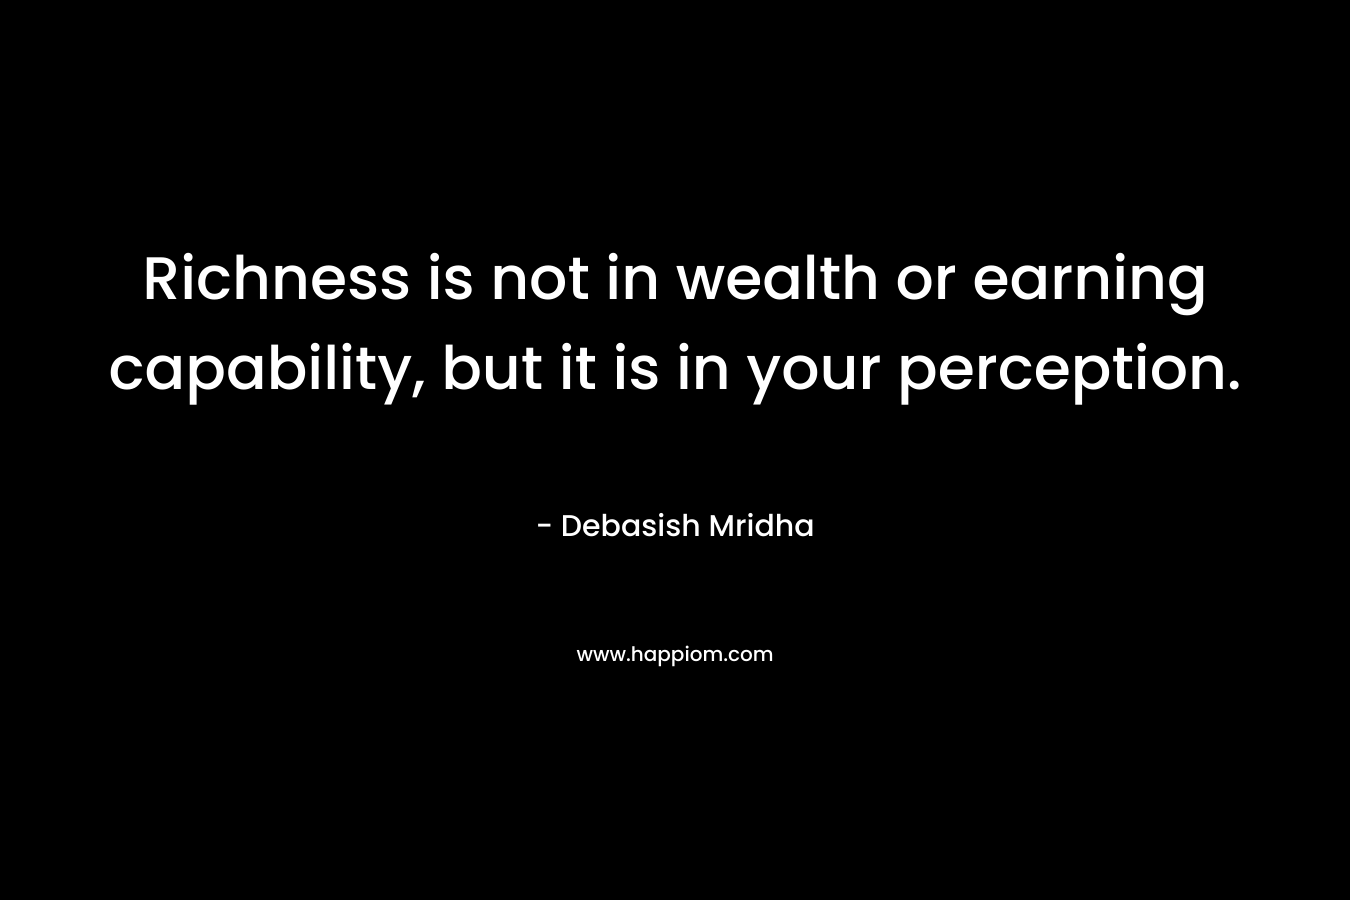 Richness is not in wealth or earning capability, but it is in your perception.